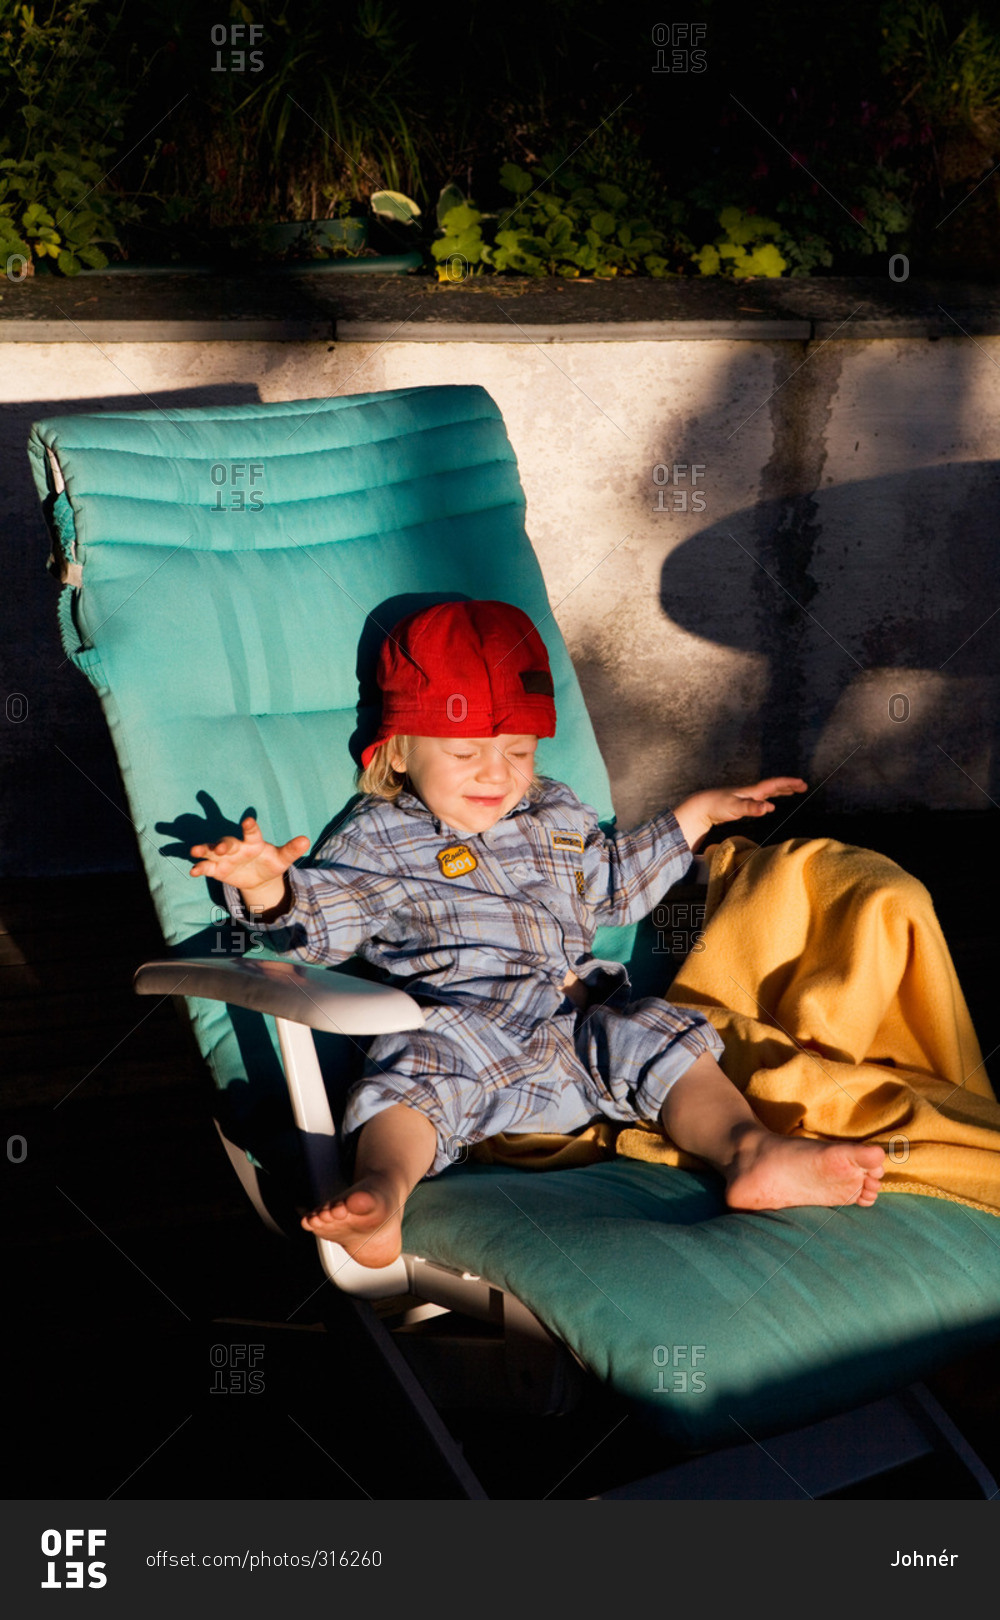 Boy in a lounger blinded by the sun